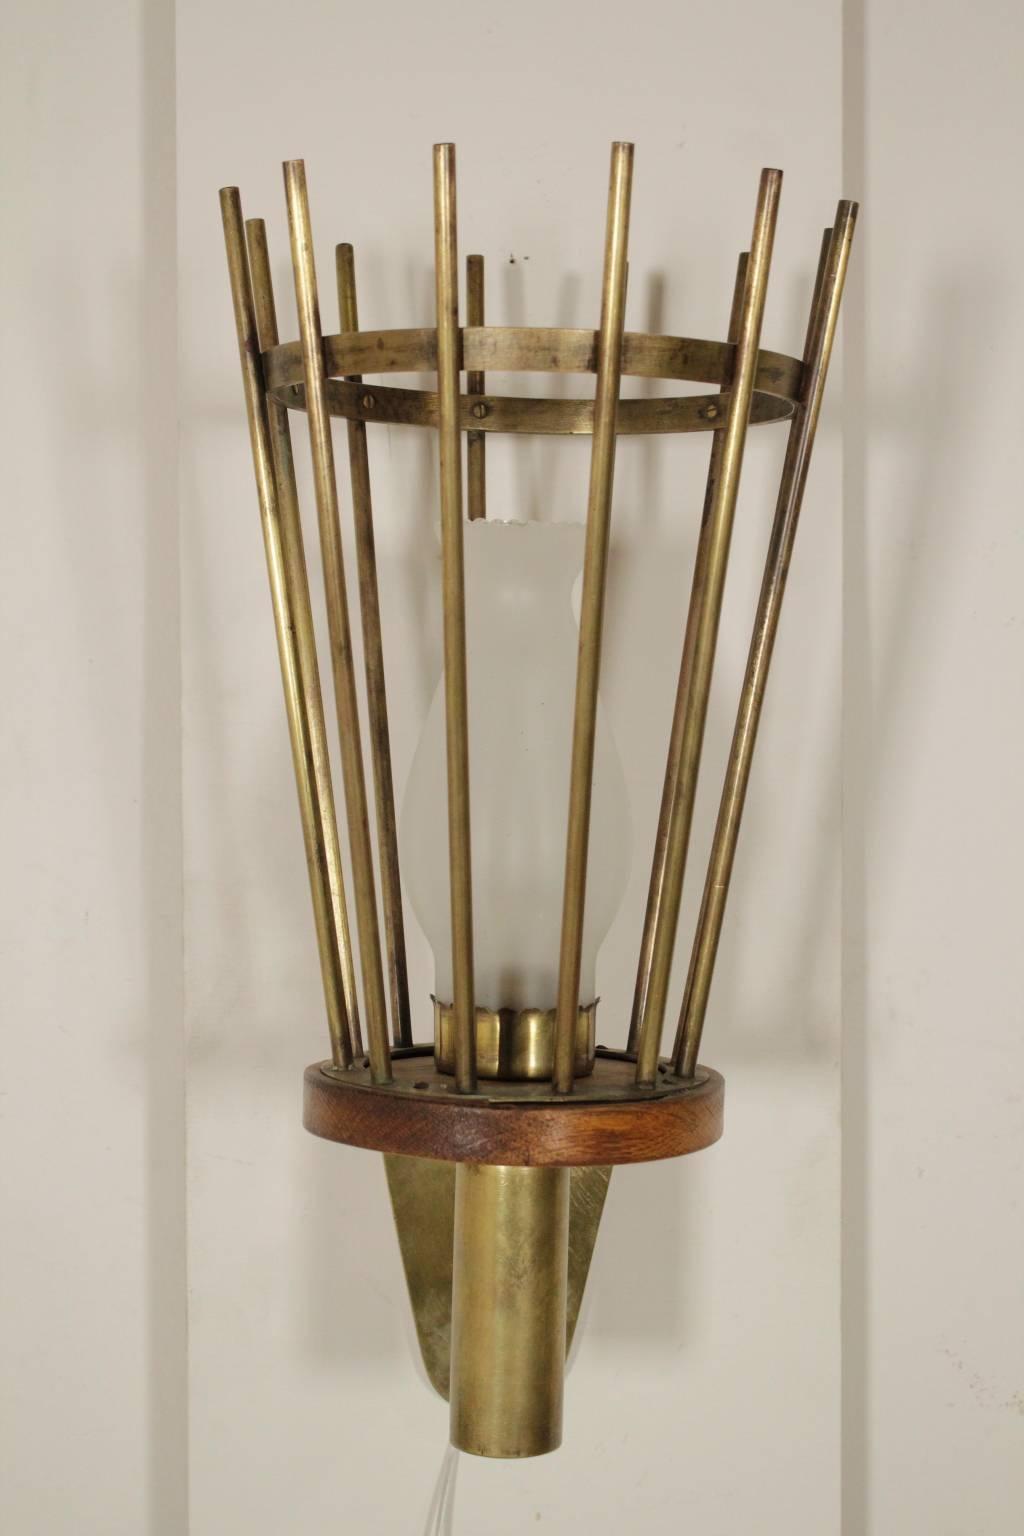 A wall lamp in the style of Gino Sarfatti's model 2024, brass, glass, wood. Manufactured in Italy, 1950s.